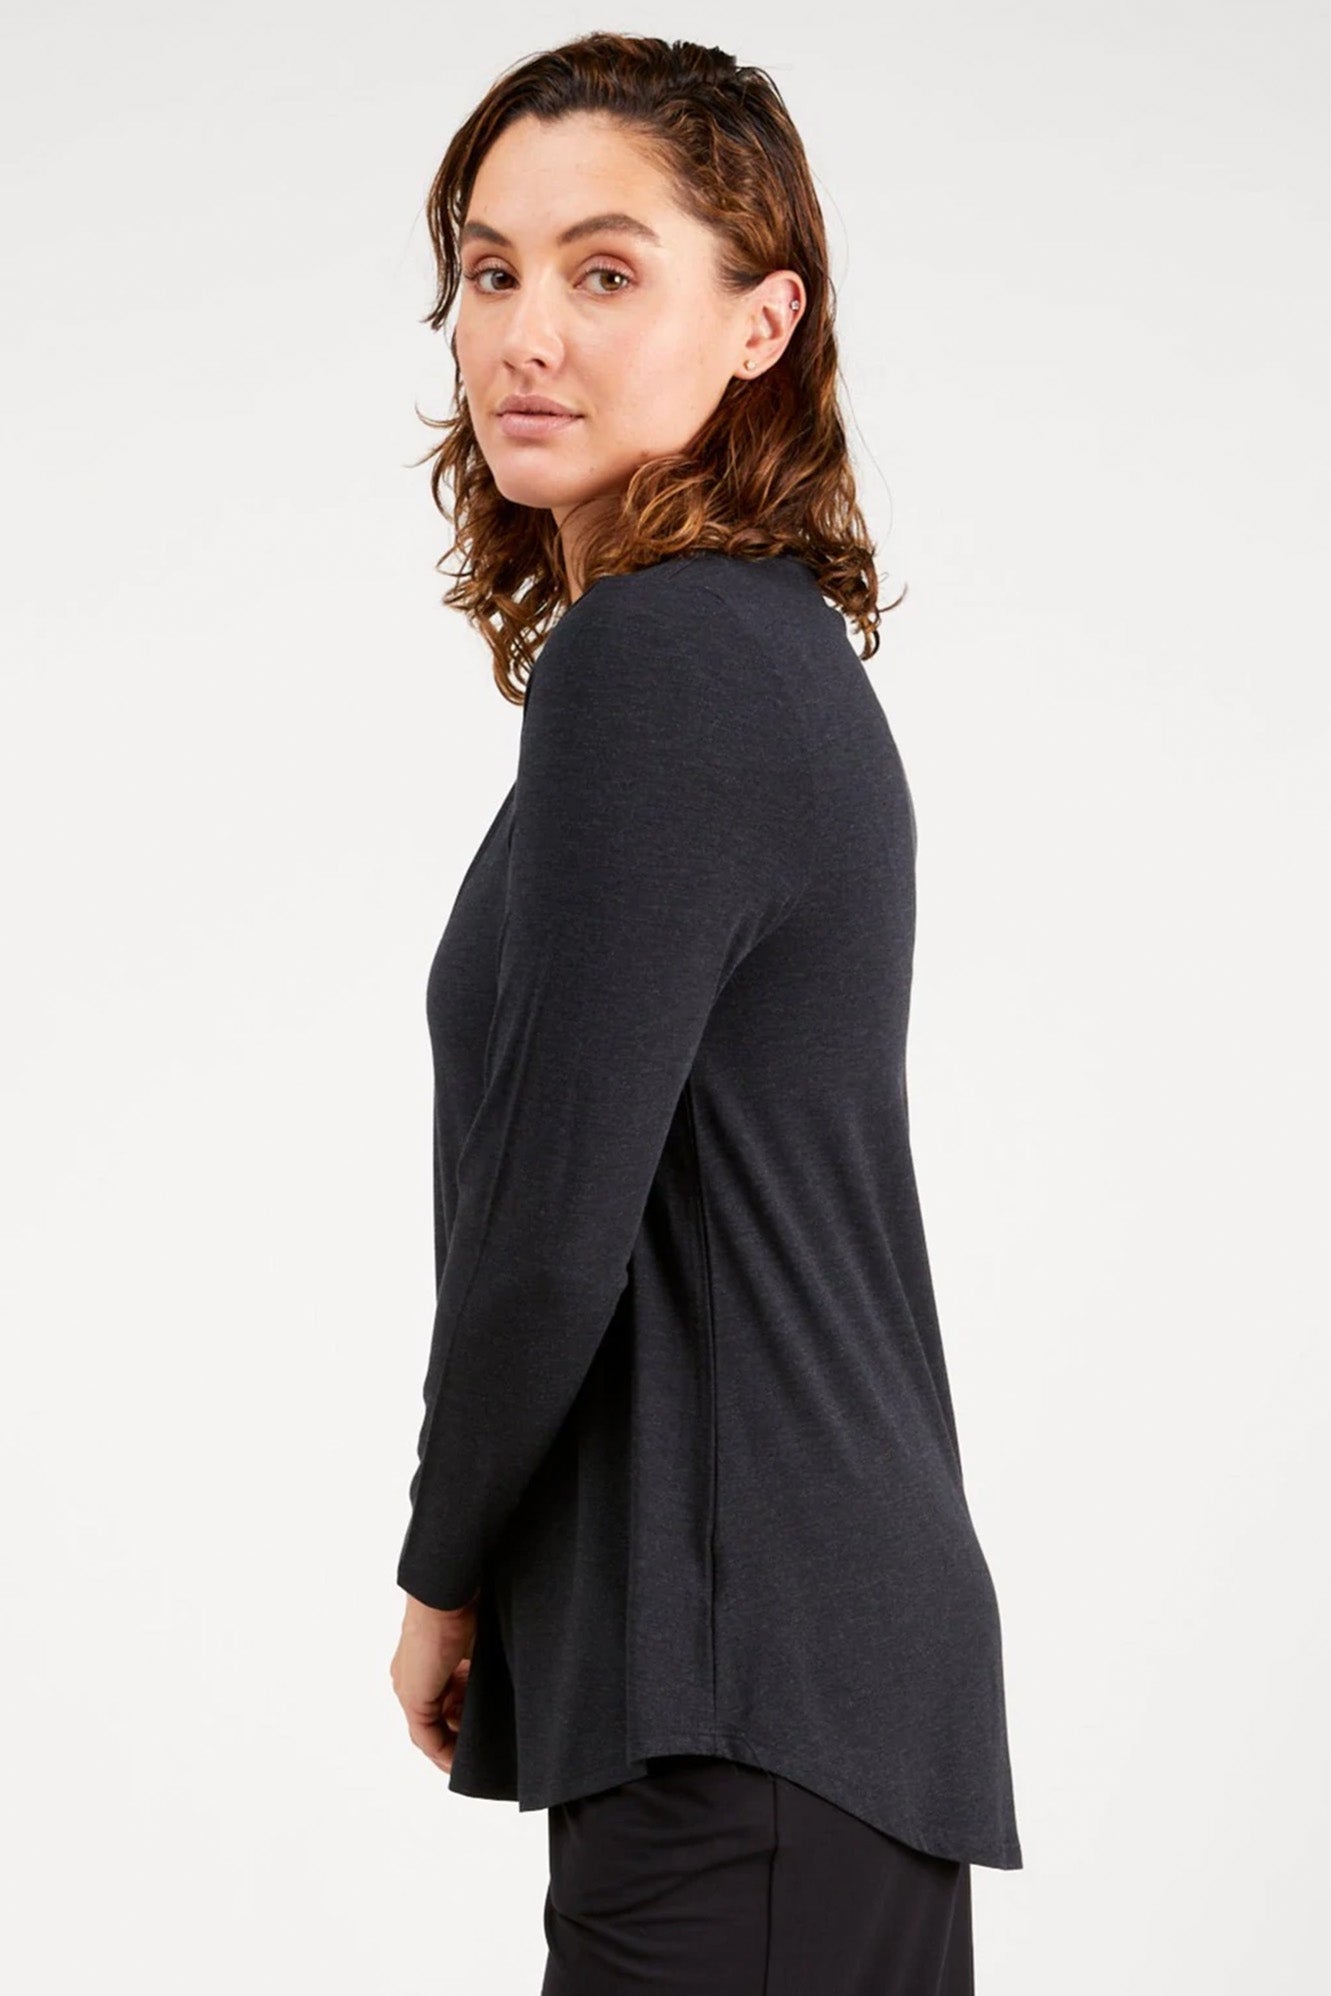 Young woman wearing Tani 79767 Cara Long Sleeve in Graphite side view